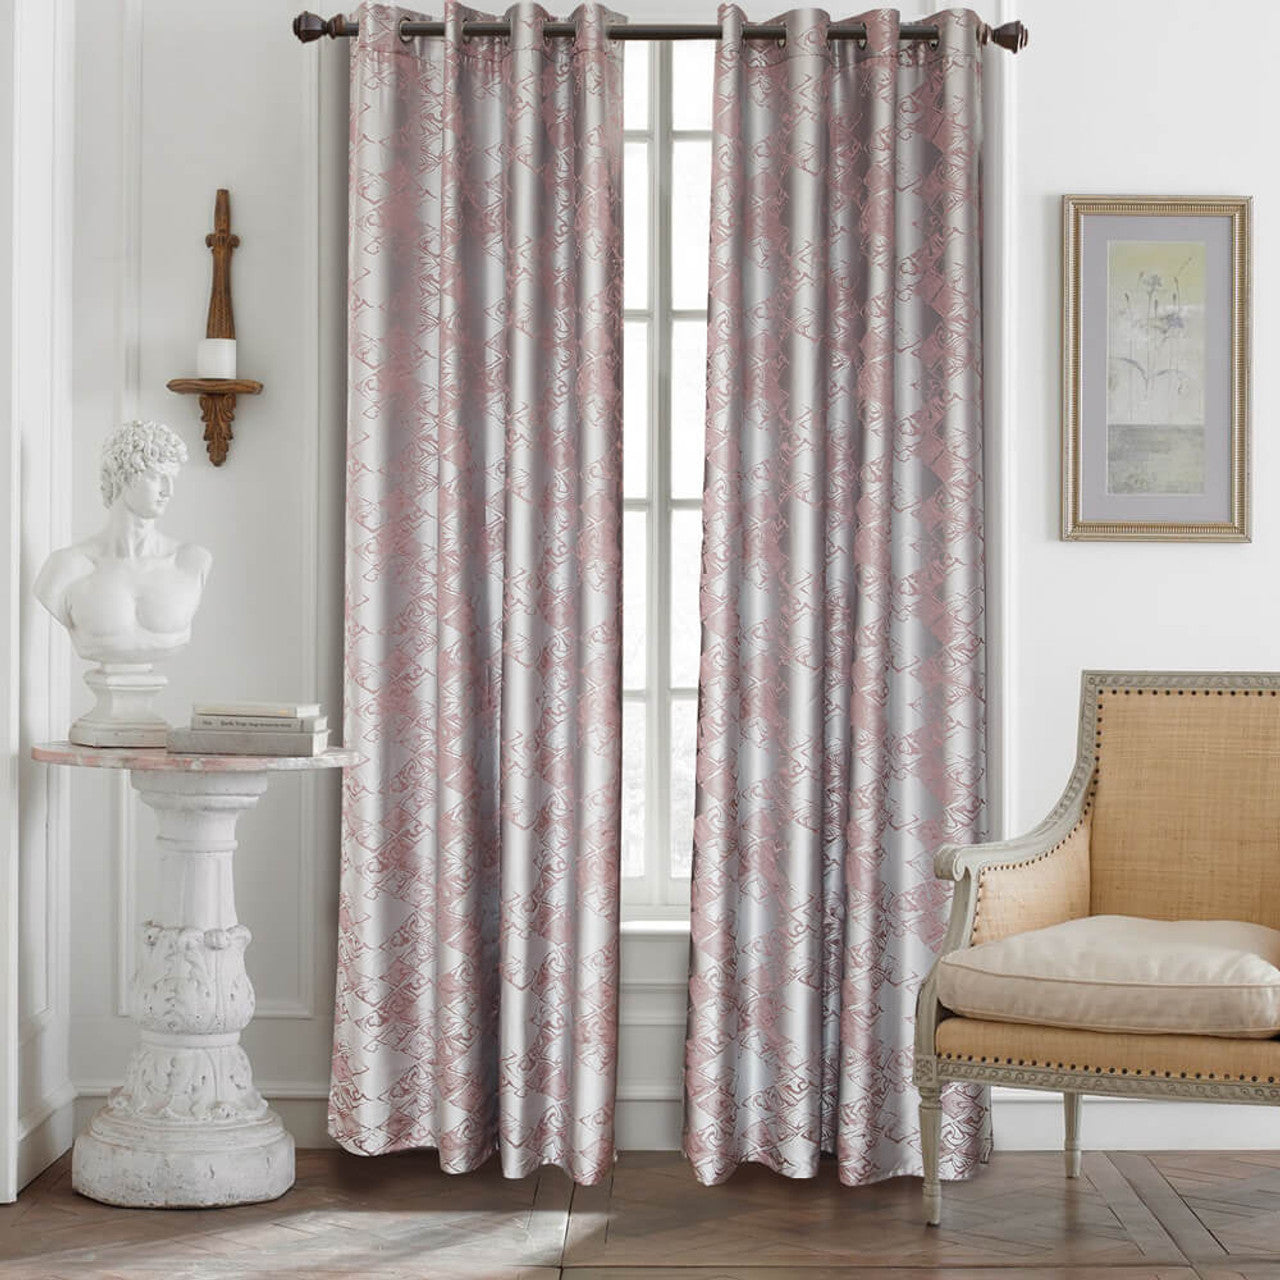 Curtains Semi-Blackout Drapes Hollywood by Dolce Mela